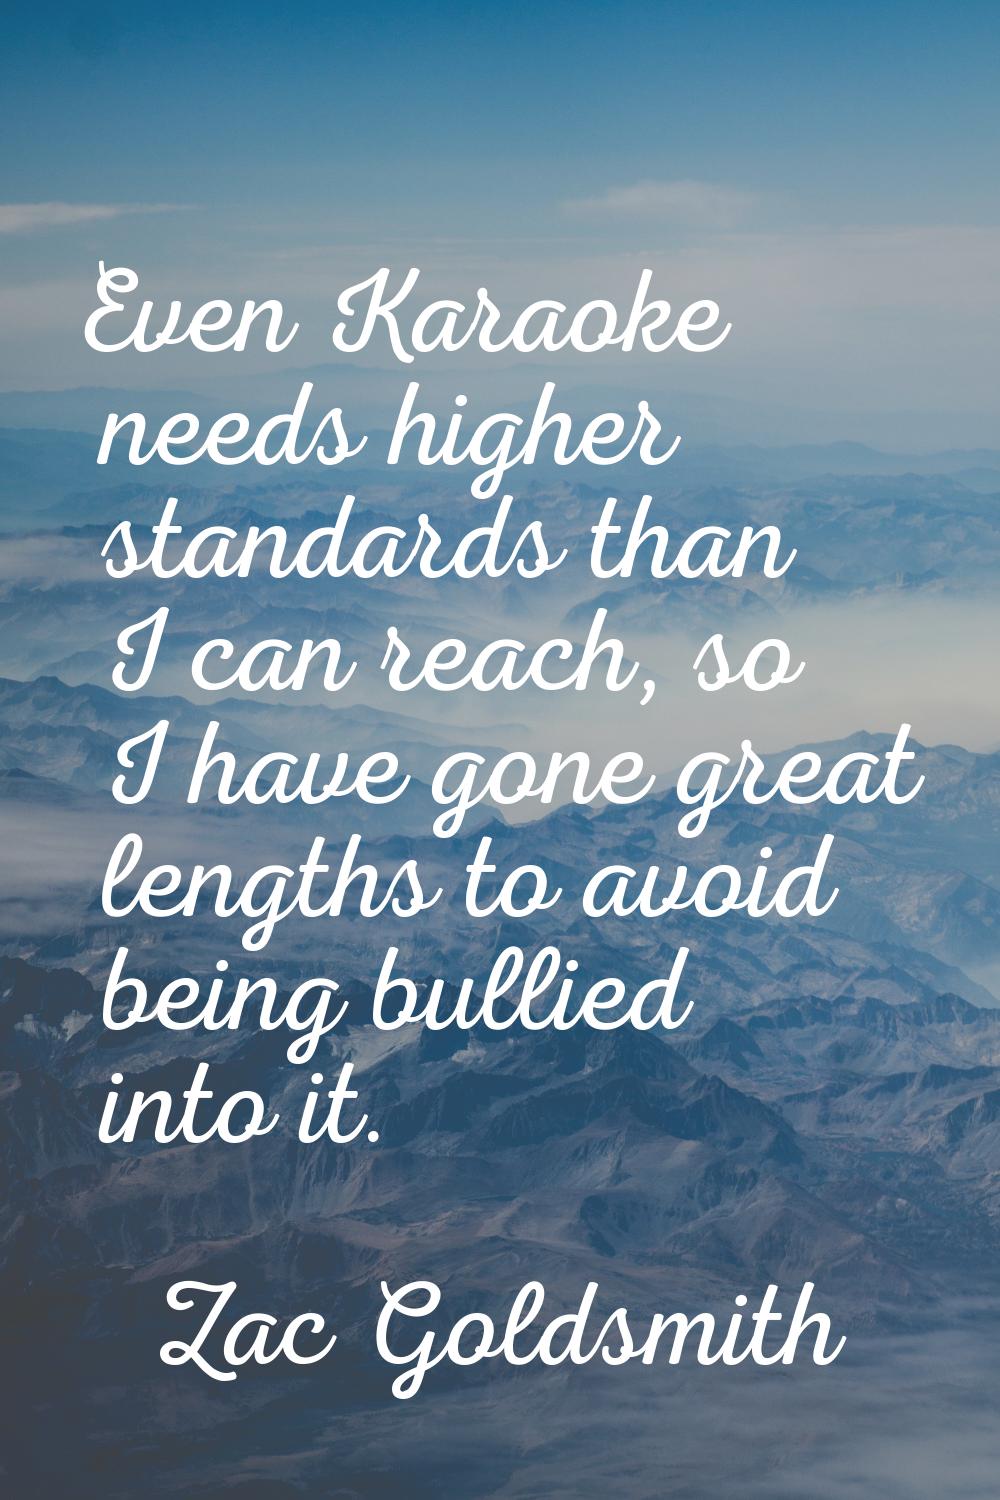 Even Karaoke needs higher standards than I can reach, so I have gone great lengths to avoid being b